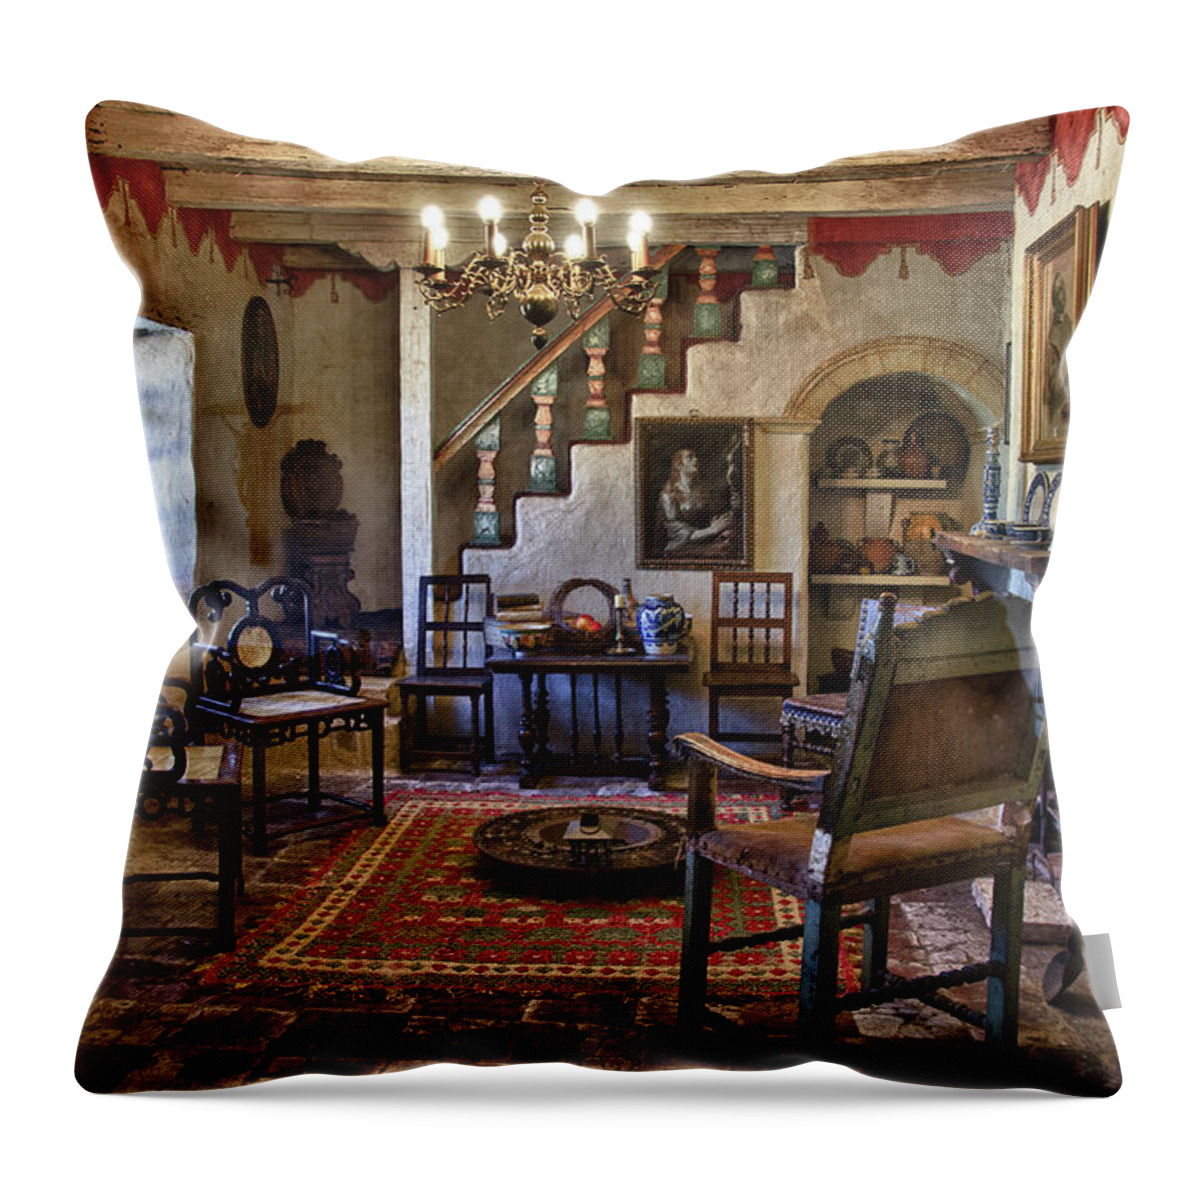 Carmel California Mission Throw Pillow featuring the photograph Carmel Mission 6 by Ron White